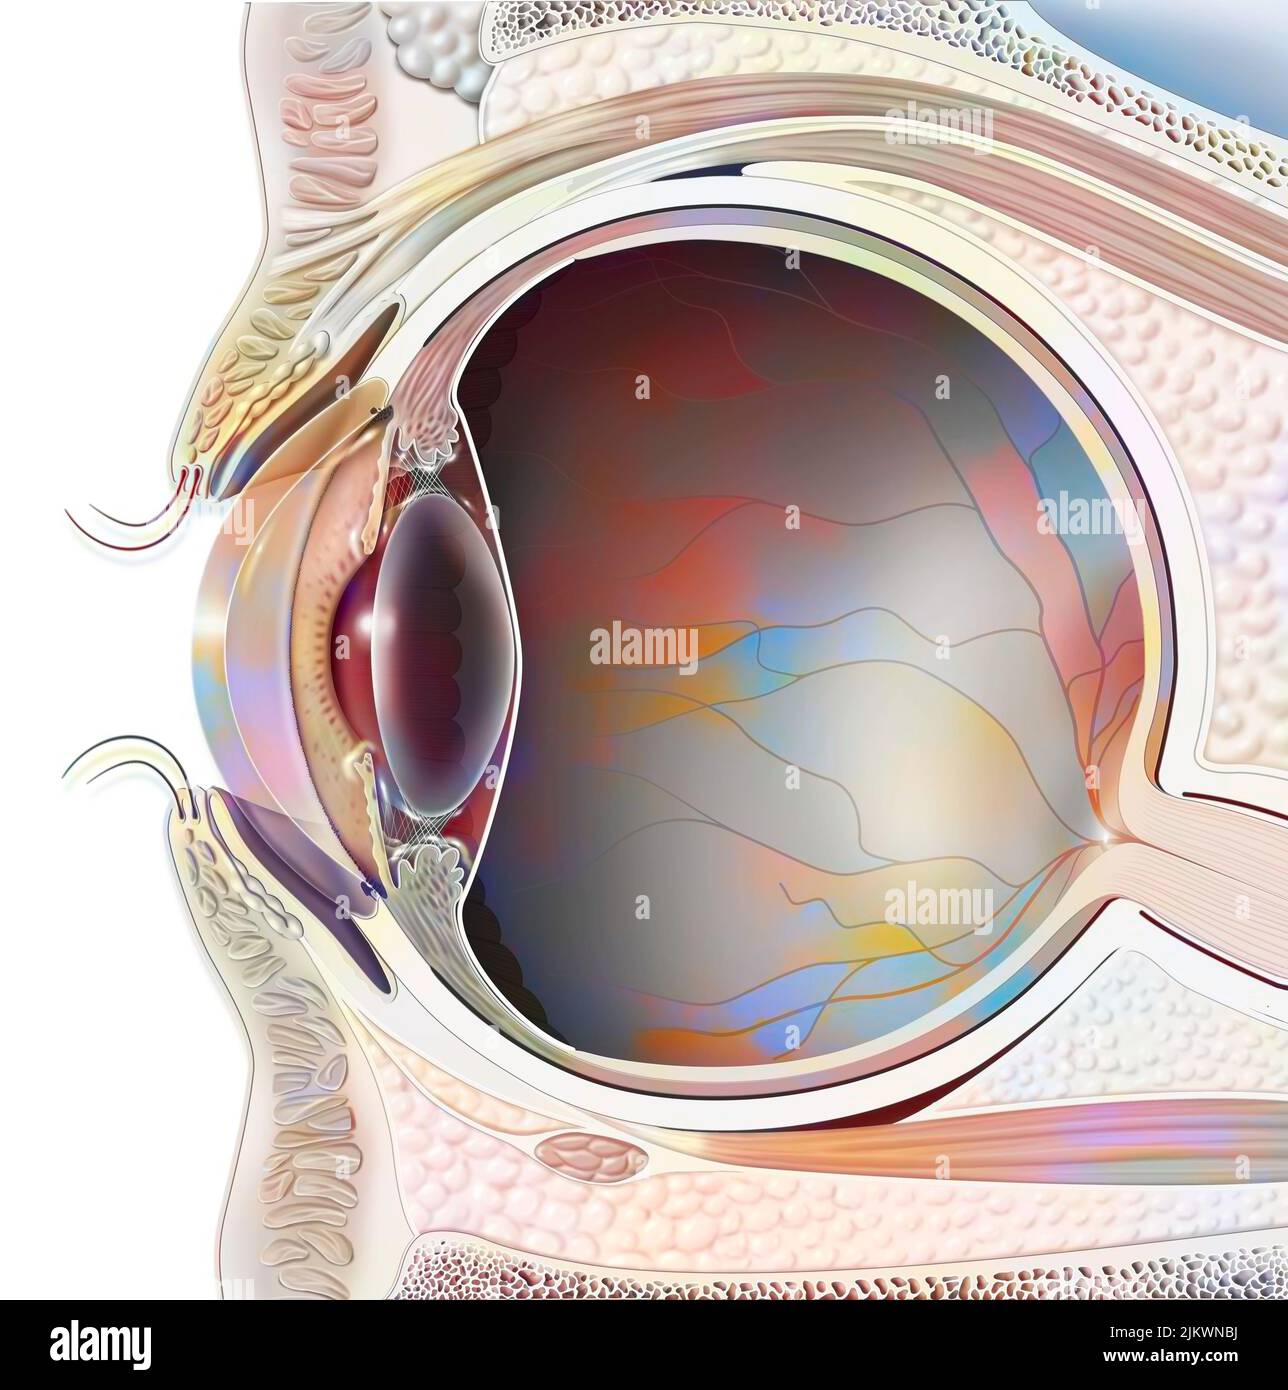 Anatomy of an eye in section showing lens, retina. Stock Photo